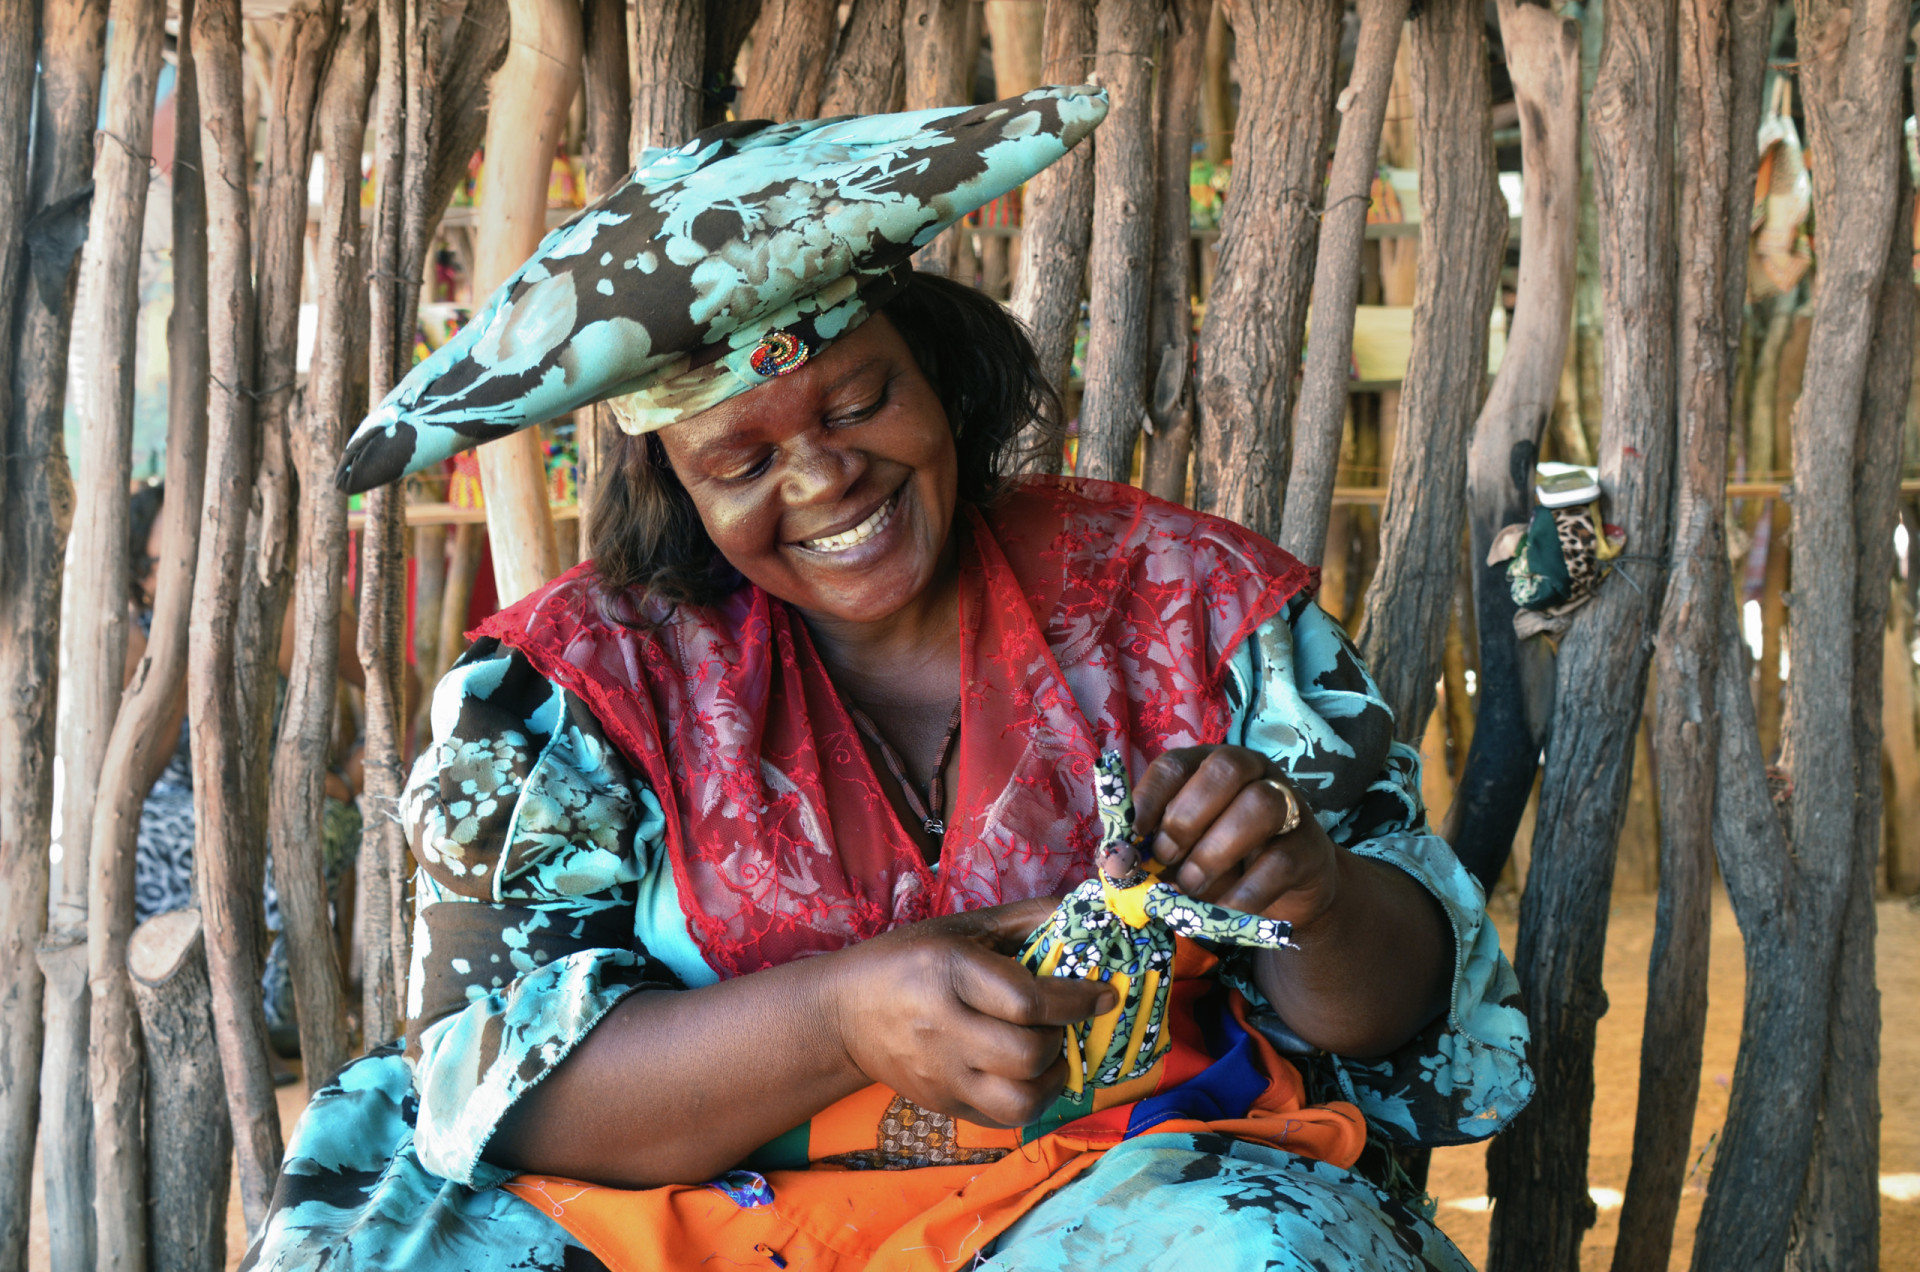 <p>The indigenous Herero tribe is most distinctive due to its rich cultural heritage that includes traditional clothing and deeply traditional beliefs.</p><p><a href="https://www.msn.com/en-us/community/channel/vid-7xx8mnucu55yw63we9va2gwr7uihbxwc68fxqp25x6tg4ftibpra?cvid=94631541bc0f4f89bfd59158d696ad7e">Follow us and access great exclusive content every day</a></p>